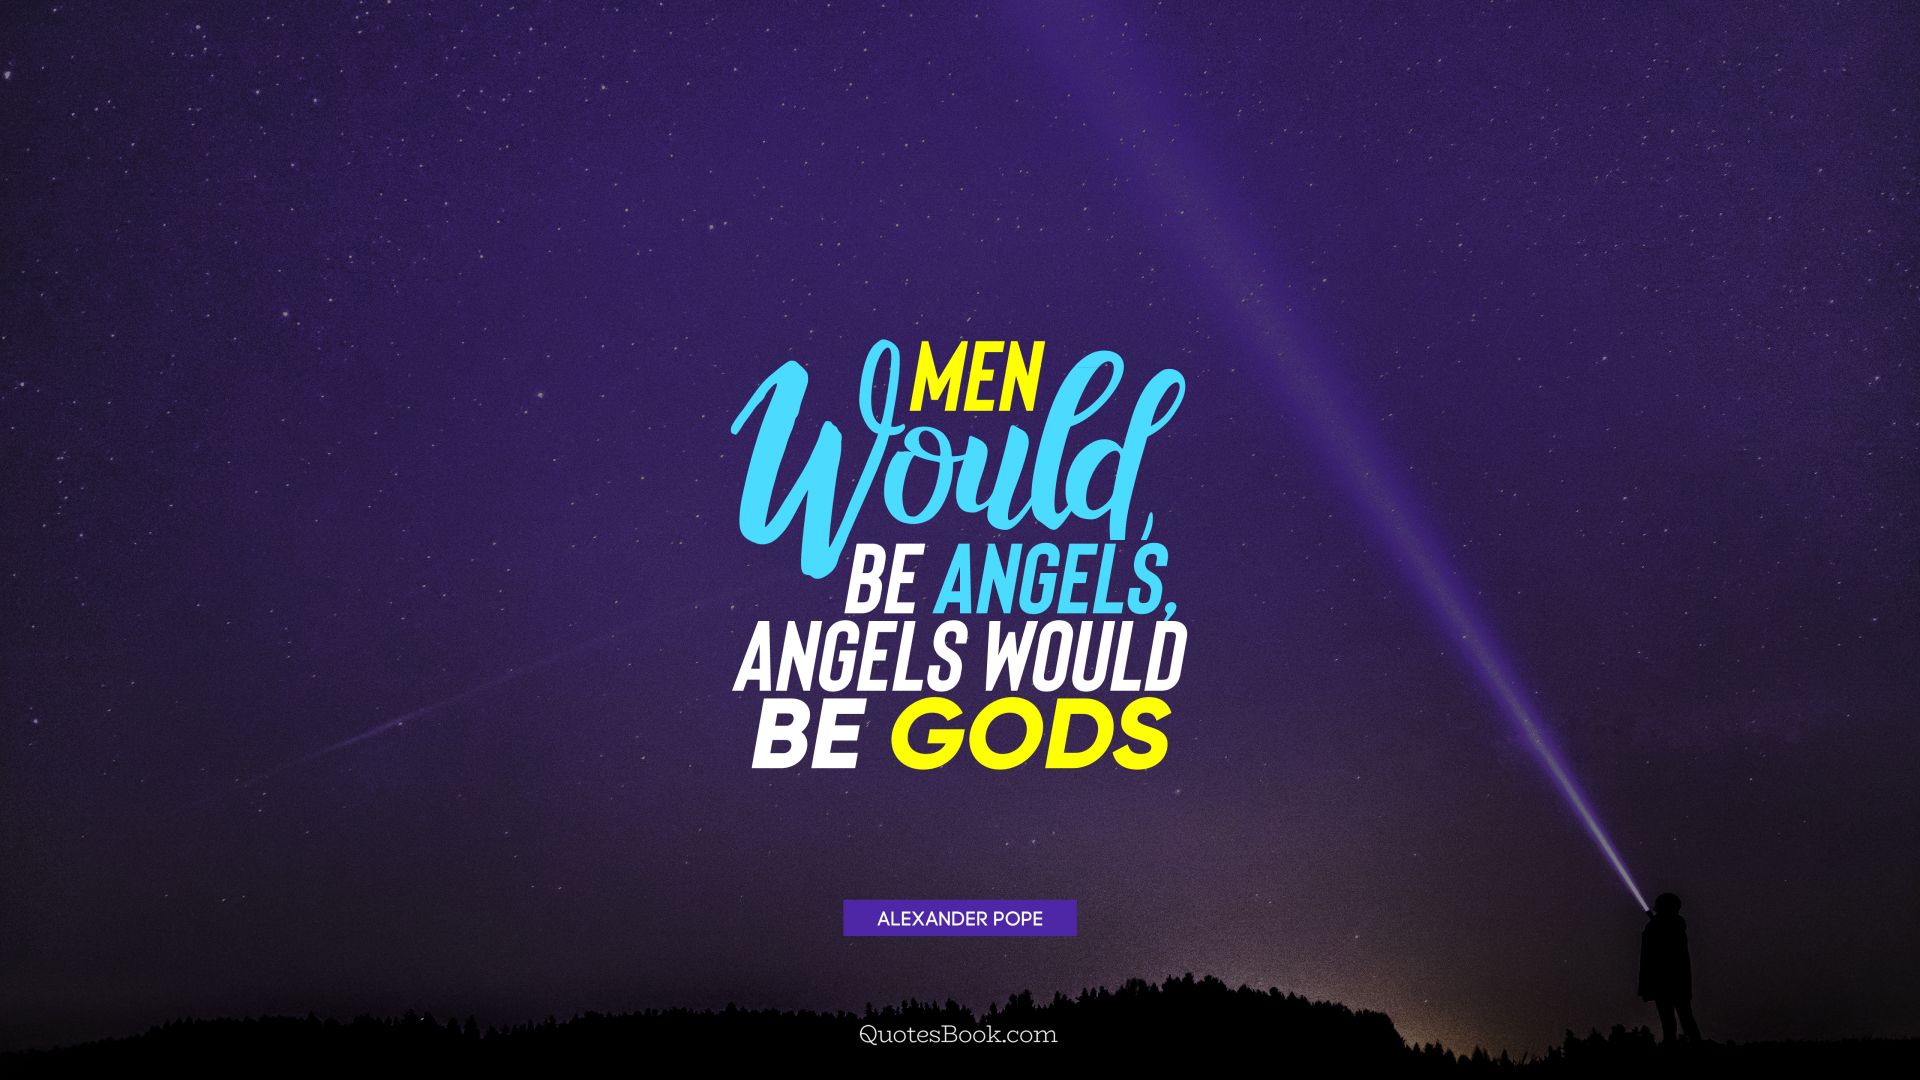 Men would be angels, angels would be Gods. - Quote by Alexander Pope